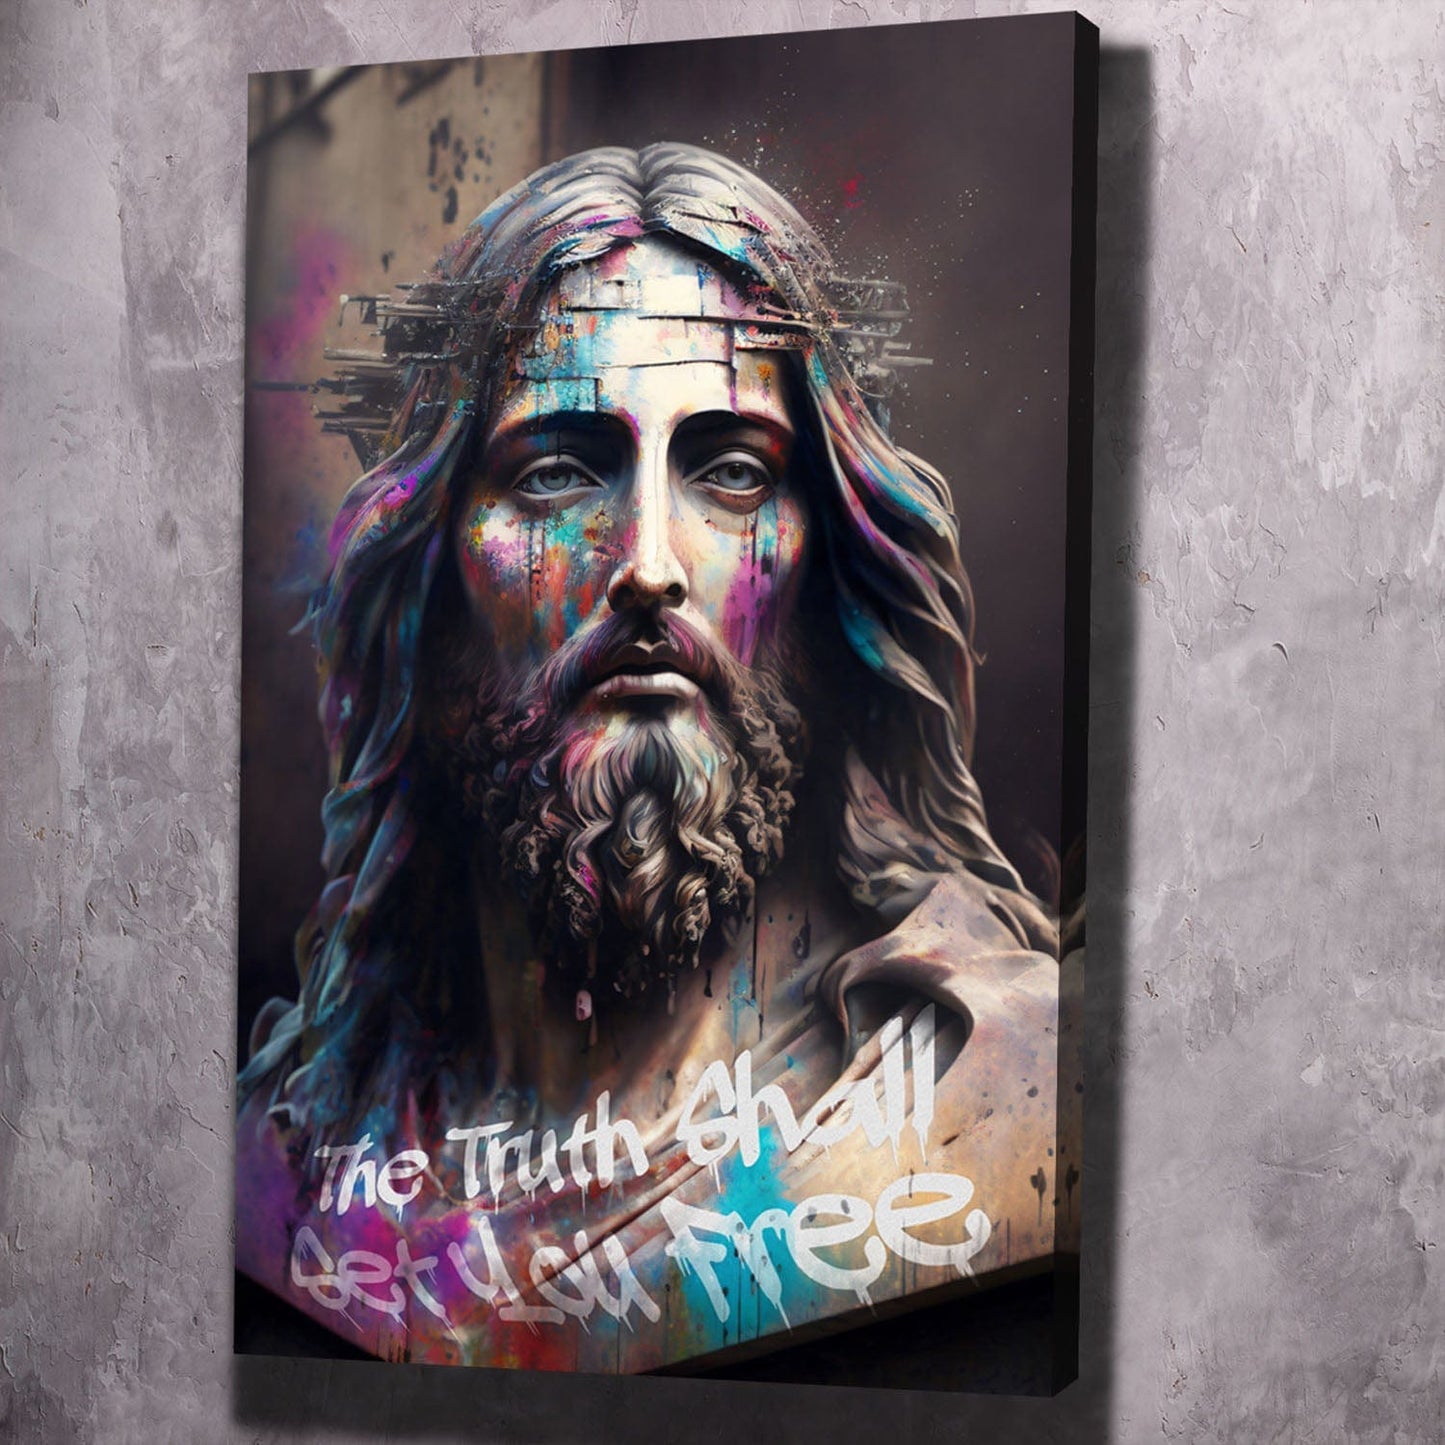 Jesus - The Truth Shall Wall Art | Inspirational Wall Art Motivational Wall Art Quotes Office Art | ImpaktMaker Exclusive Canvas Art Portrait